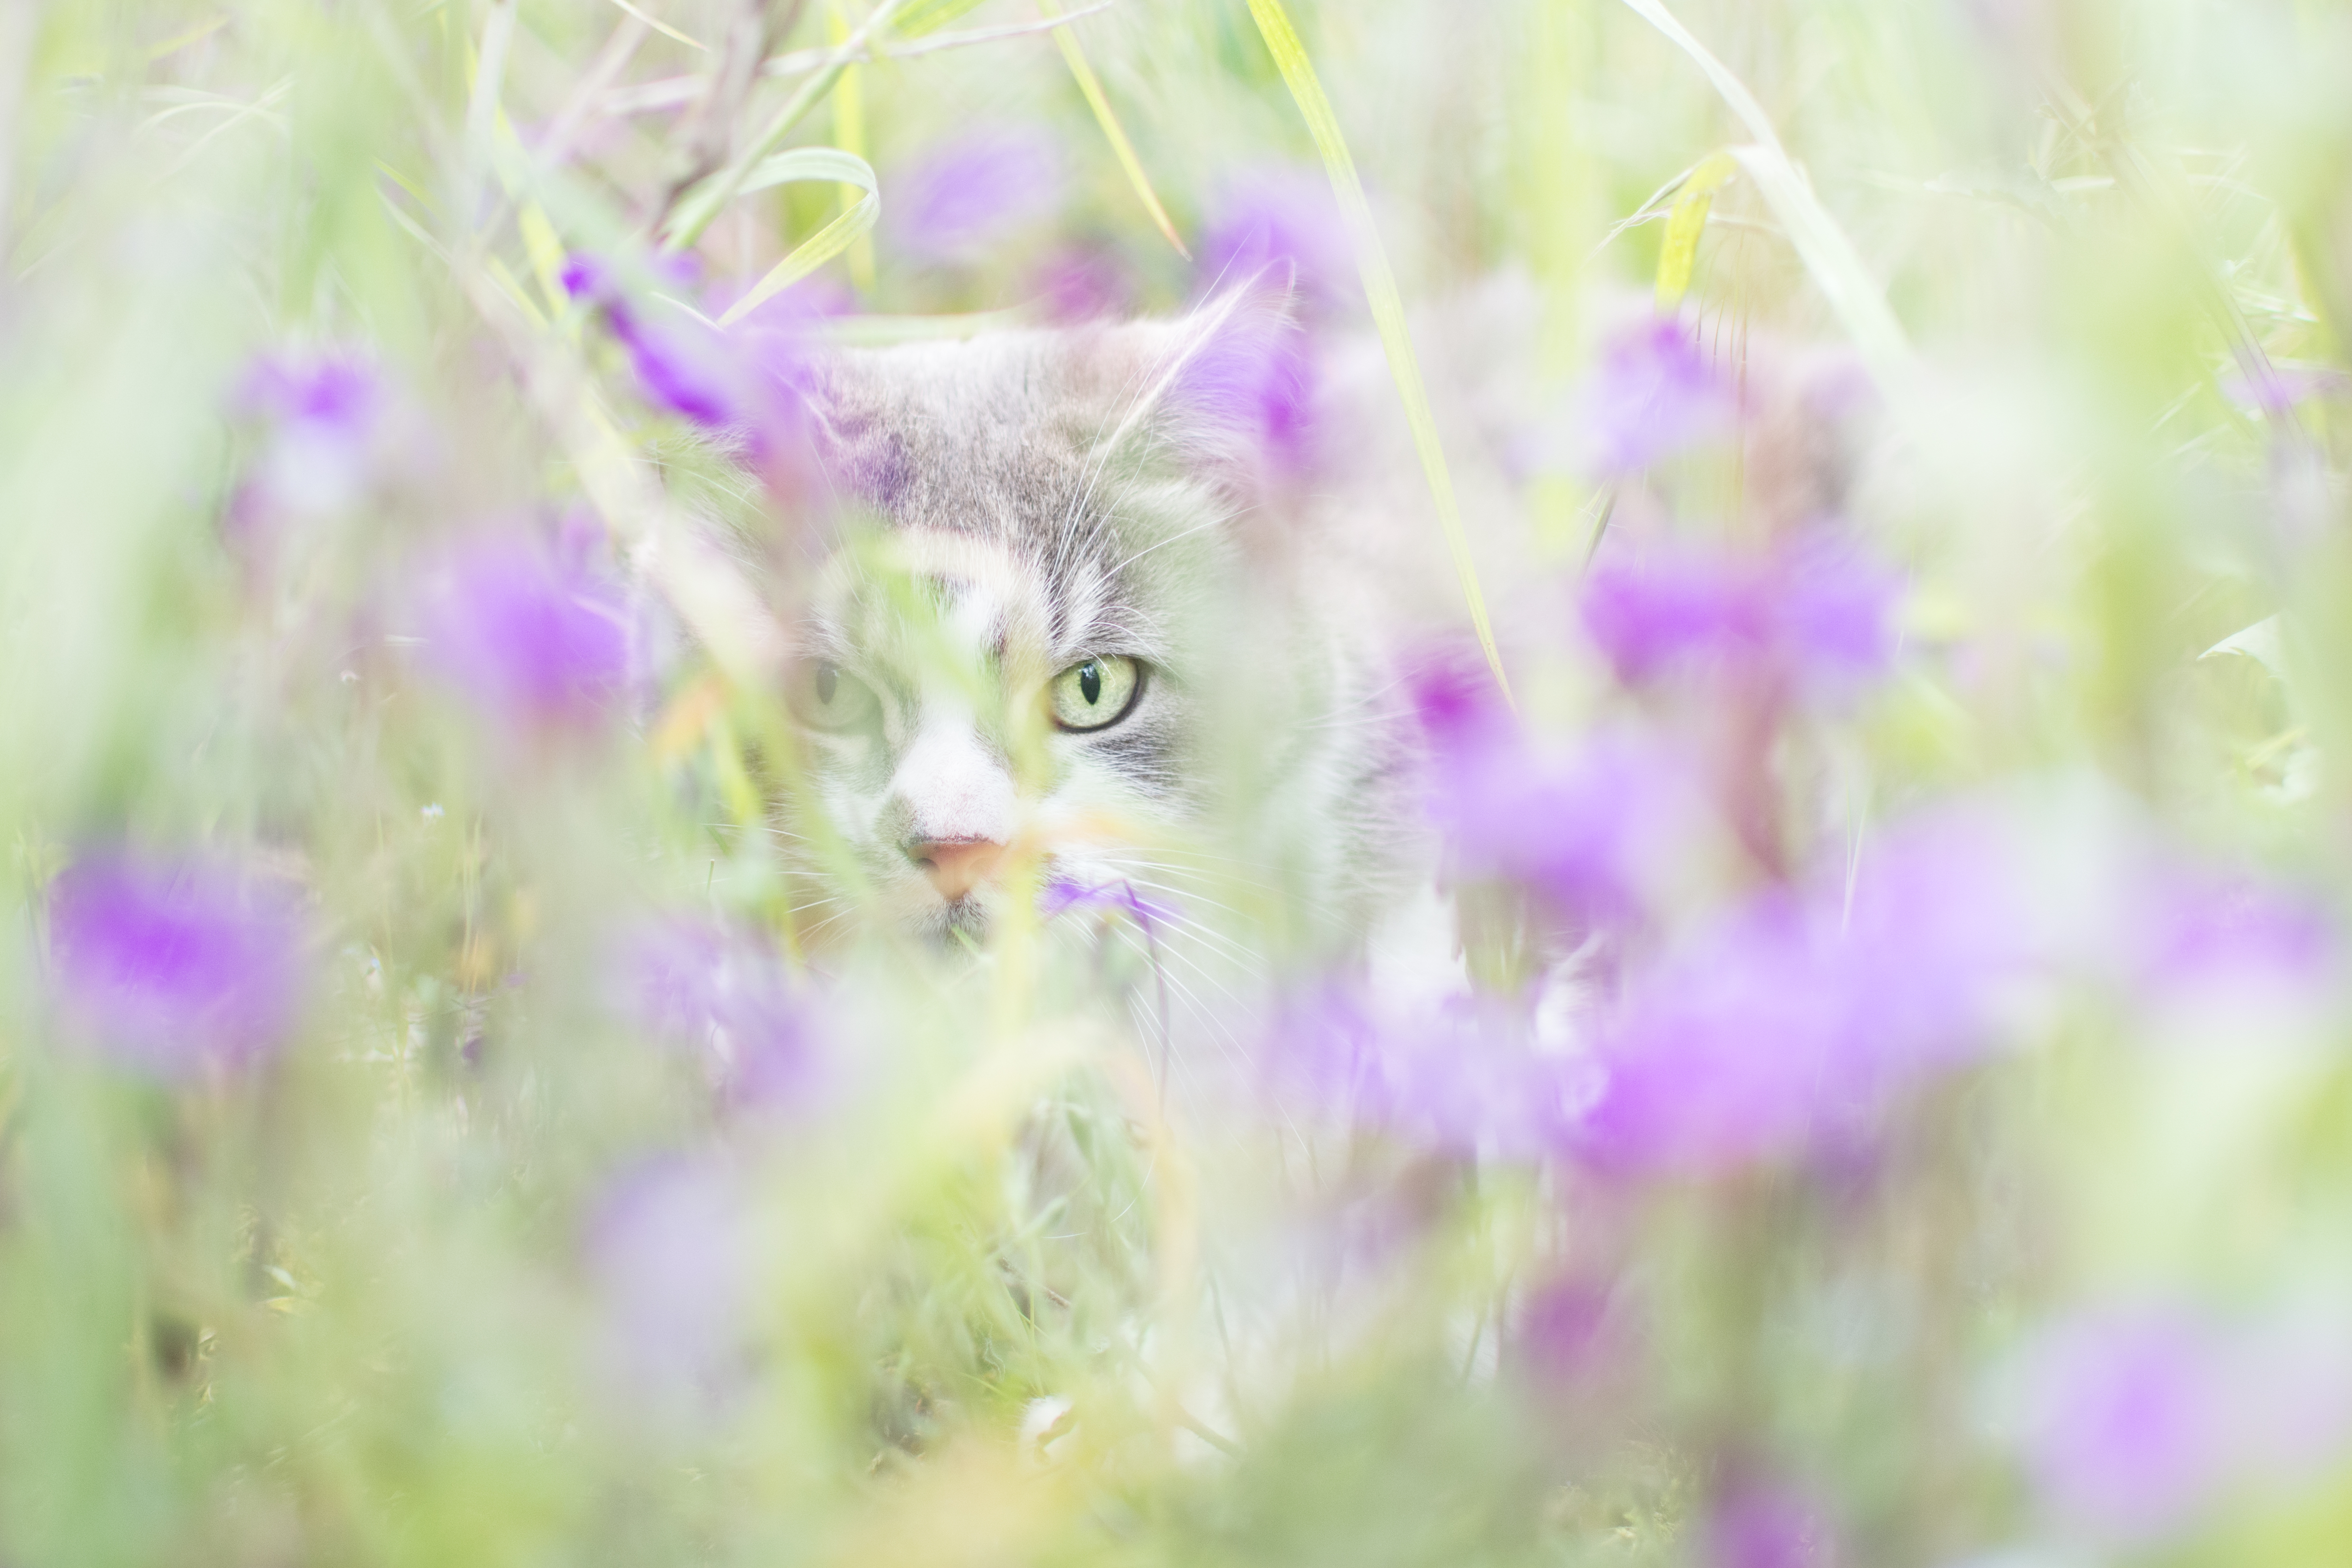 Free Image, nature, animal, green, art, colour, beauty, eyes, flower, purple, whiskers, small to medium sized cats, wildflower, lilac, lavender, flora, kitten, meadow, wildlife, sunlight, close up, cat like mammal, snout